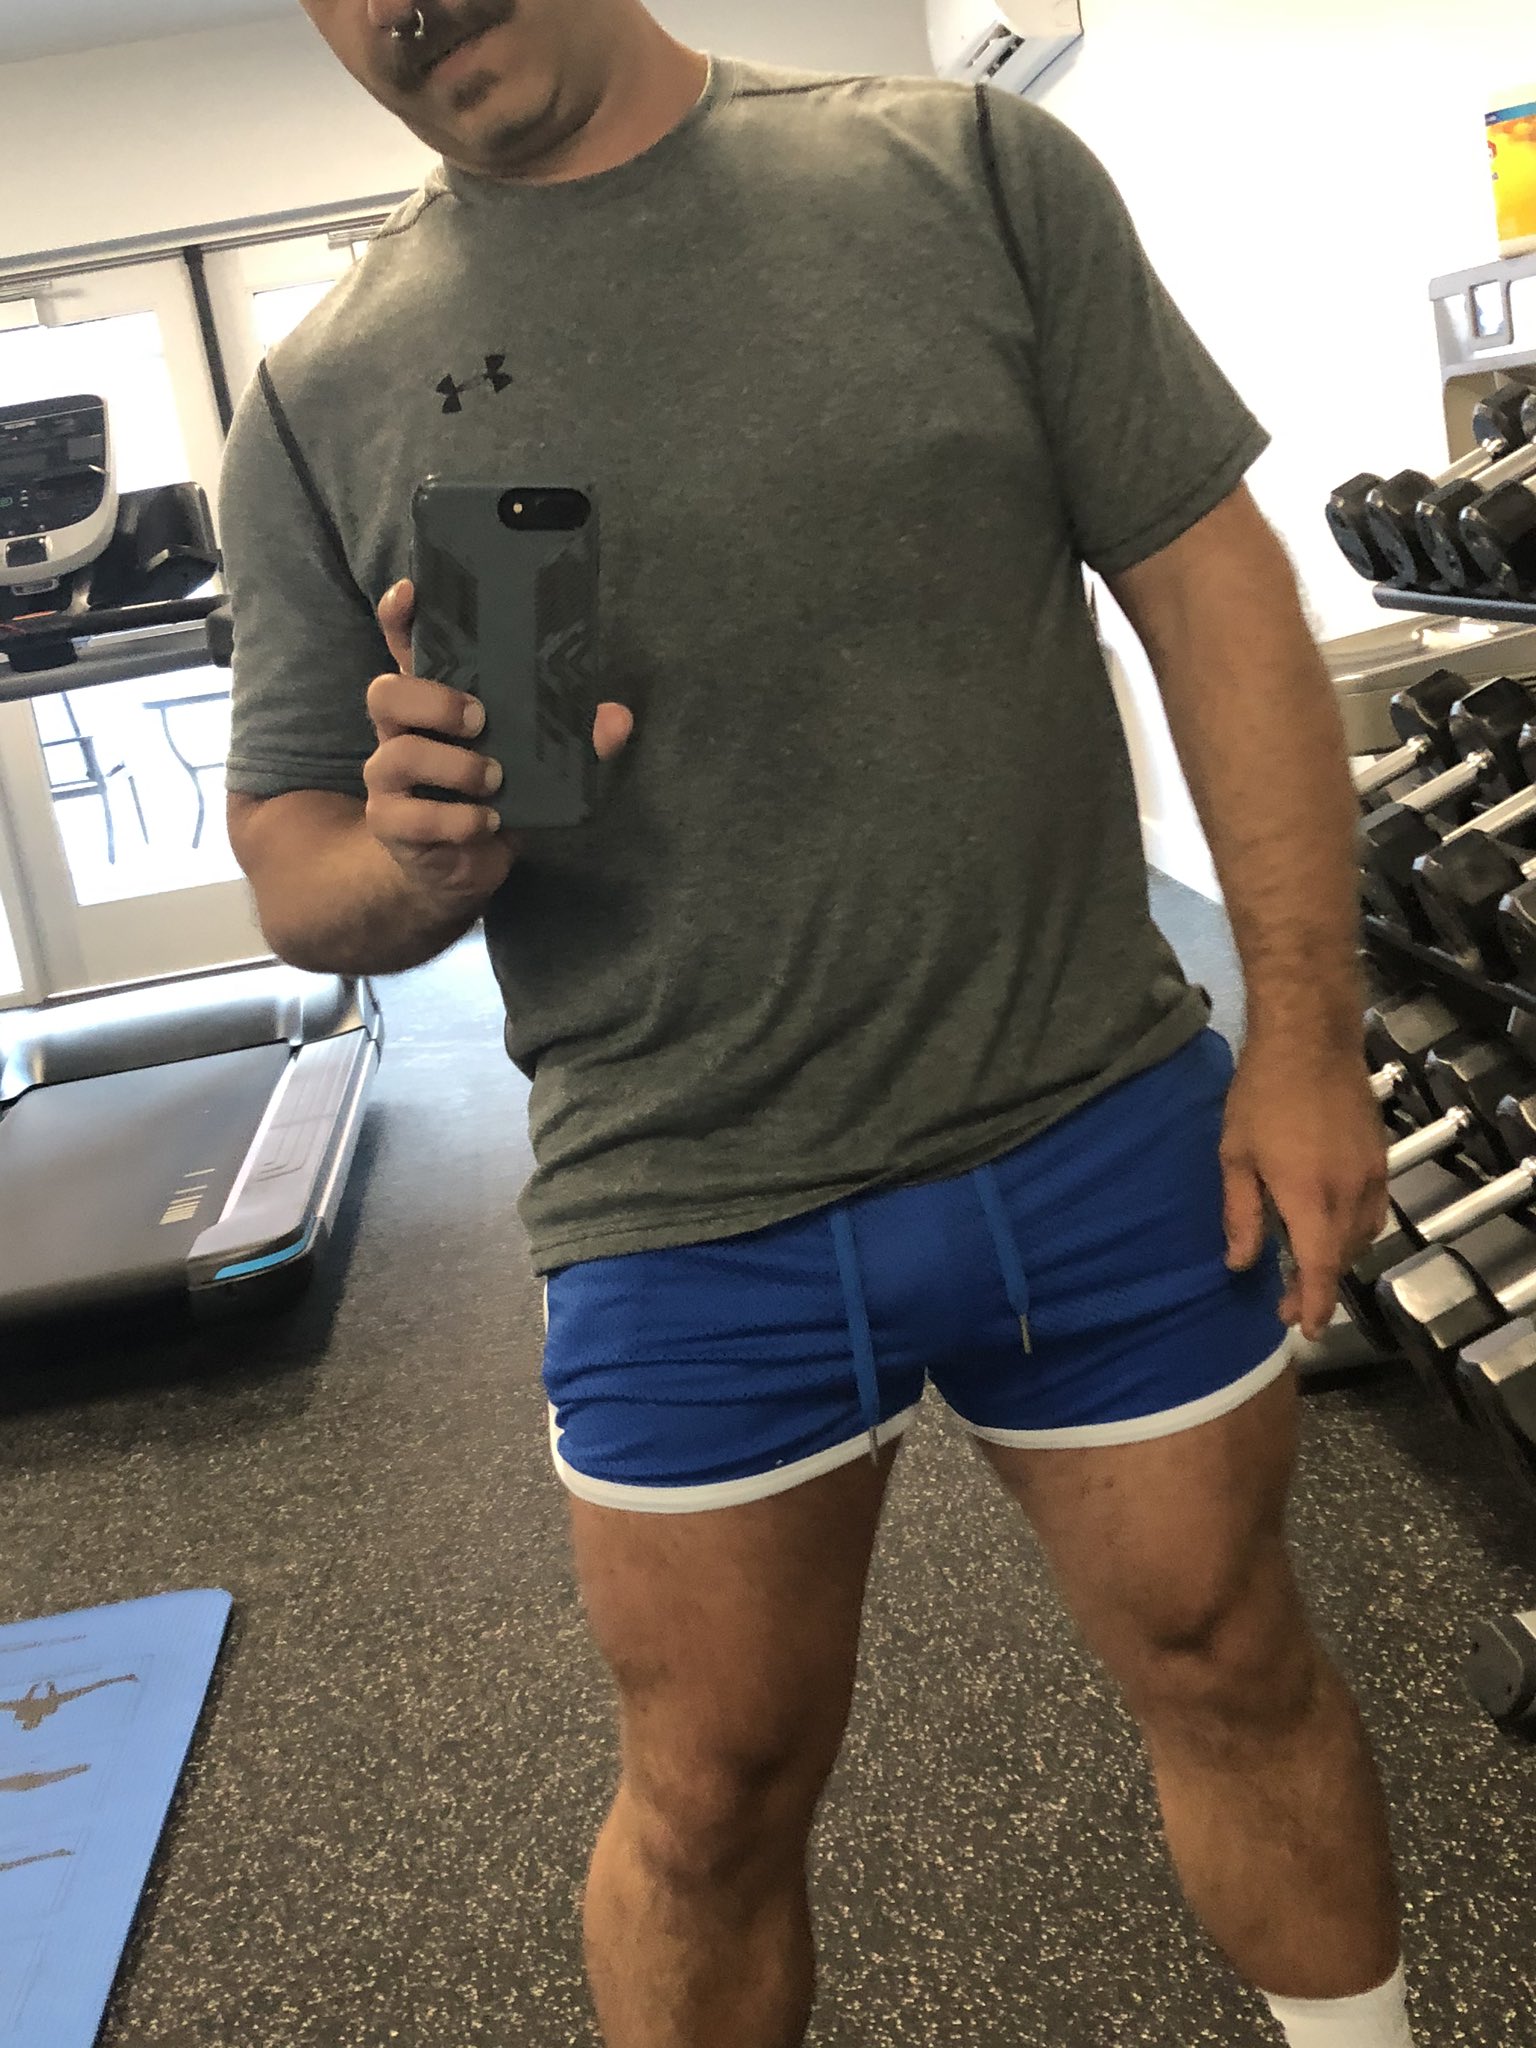 breast To contribute write a letter Store Bought is Fine on Twitter: "I love what these @WOOFClothingUSA shorts  do for my legs. #woofable #gymshorts #freeball https://t.co/Chne0G46OR" /  Twitter